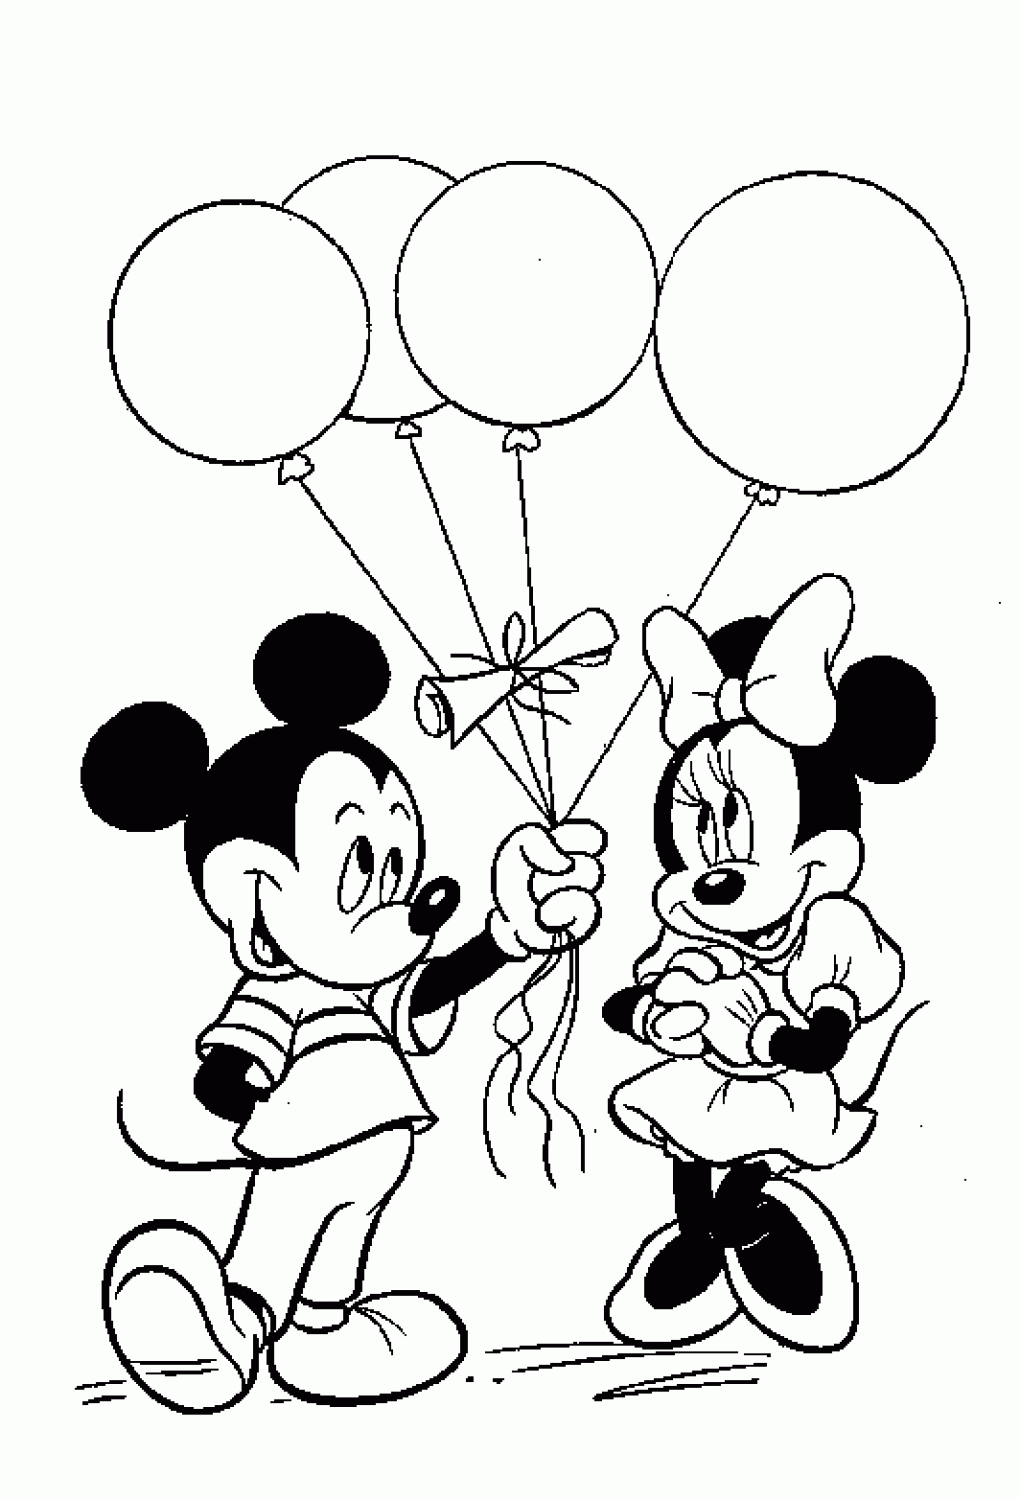 Mickey And Minnie Coloring Pages To Print Coloring Pages Mickey Andinnieouse Coloring Pages Colors Of